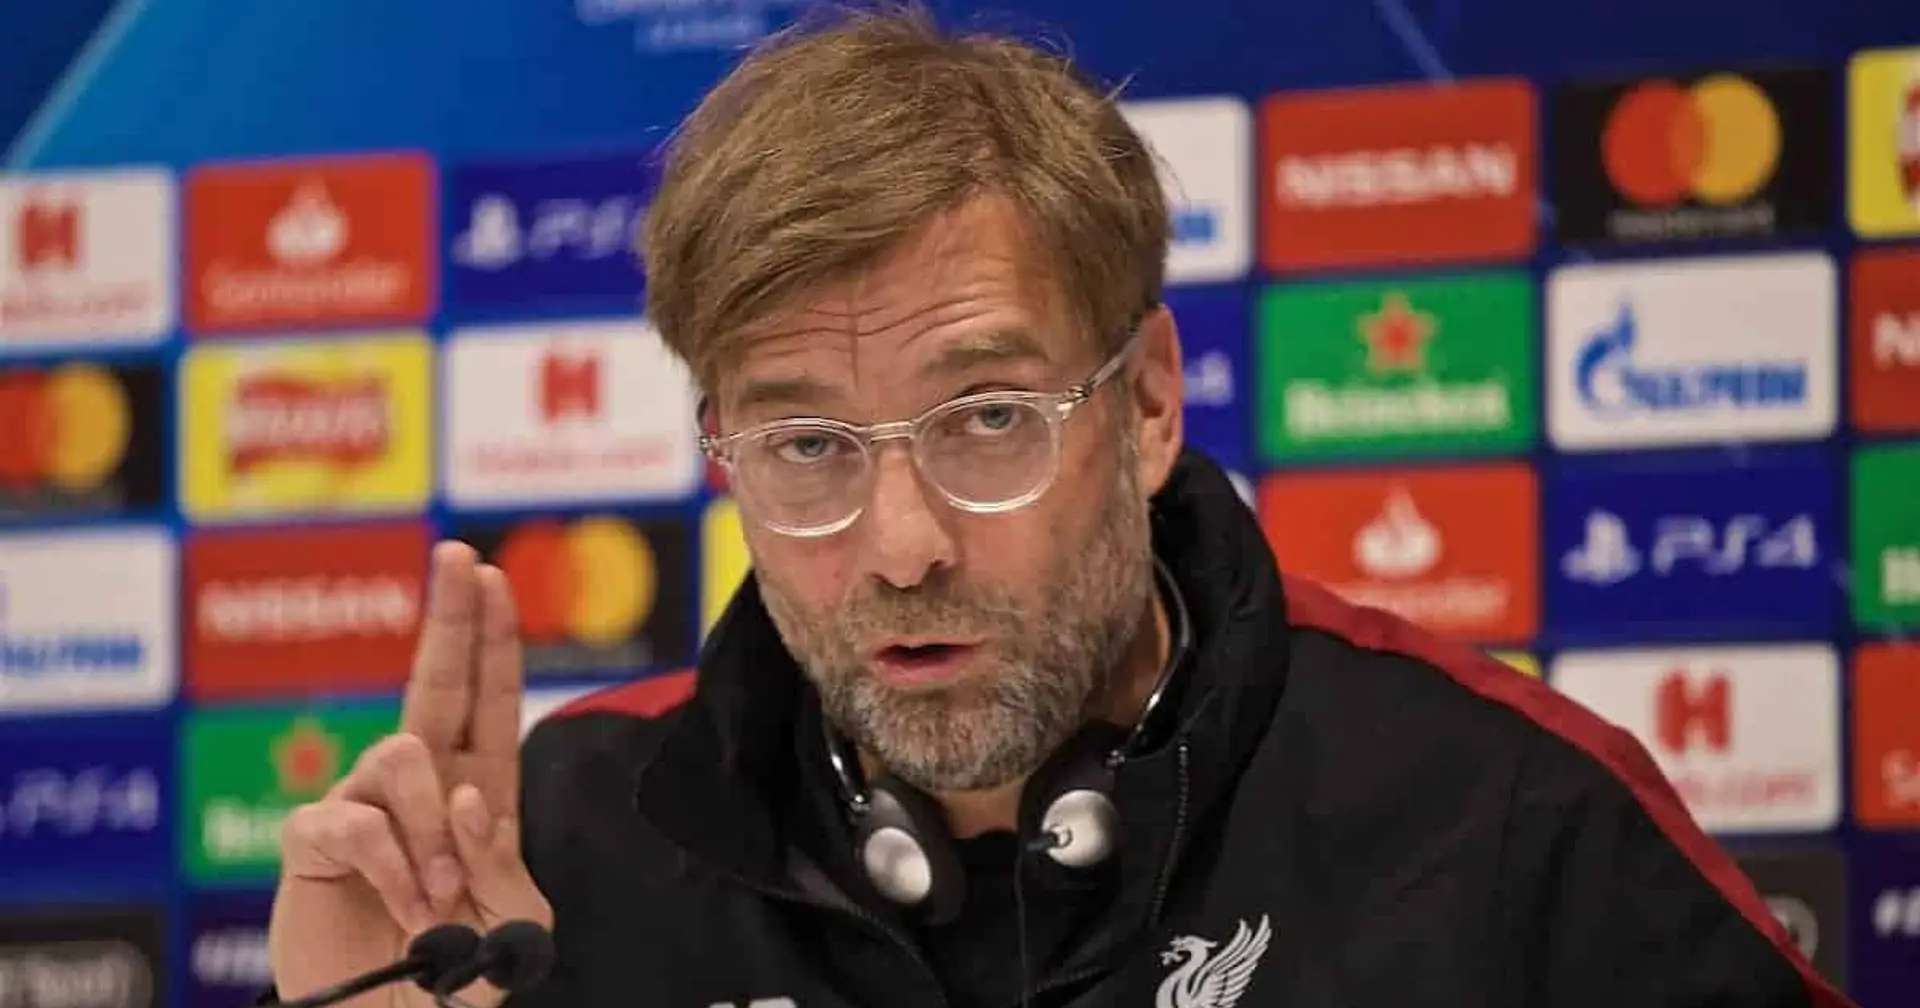 'A lot of really young and exciting talents': Jurgen Klopp previews Ajax clash